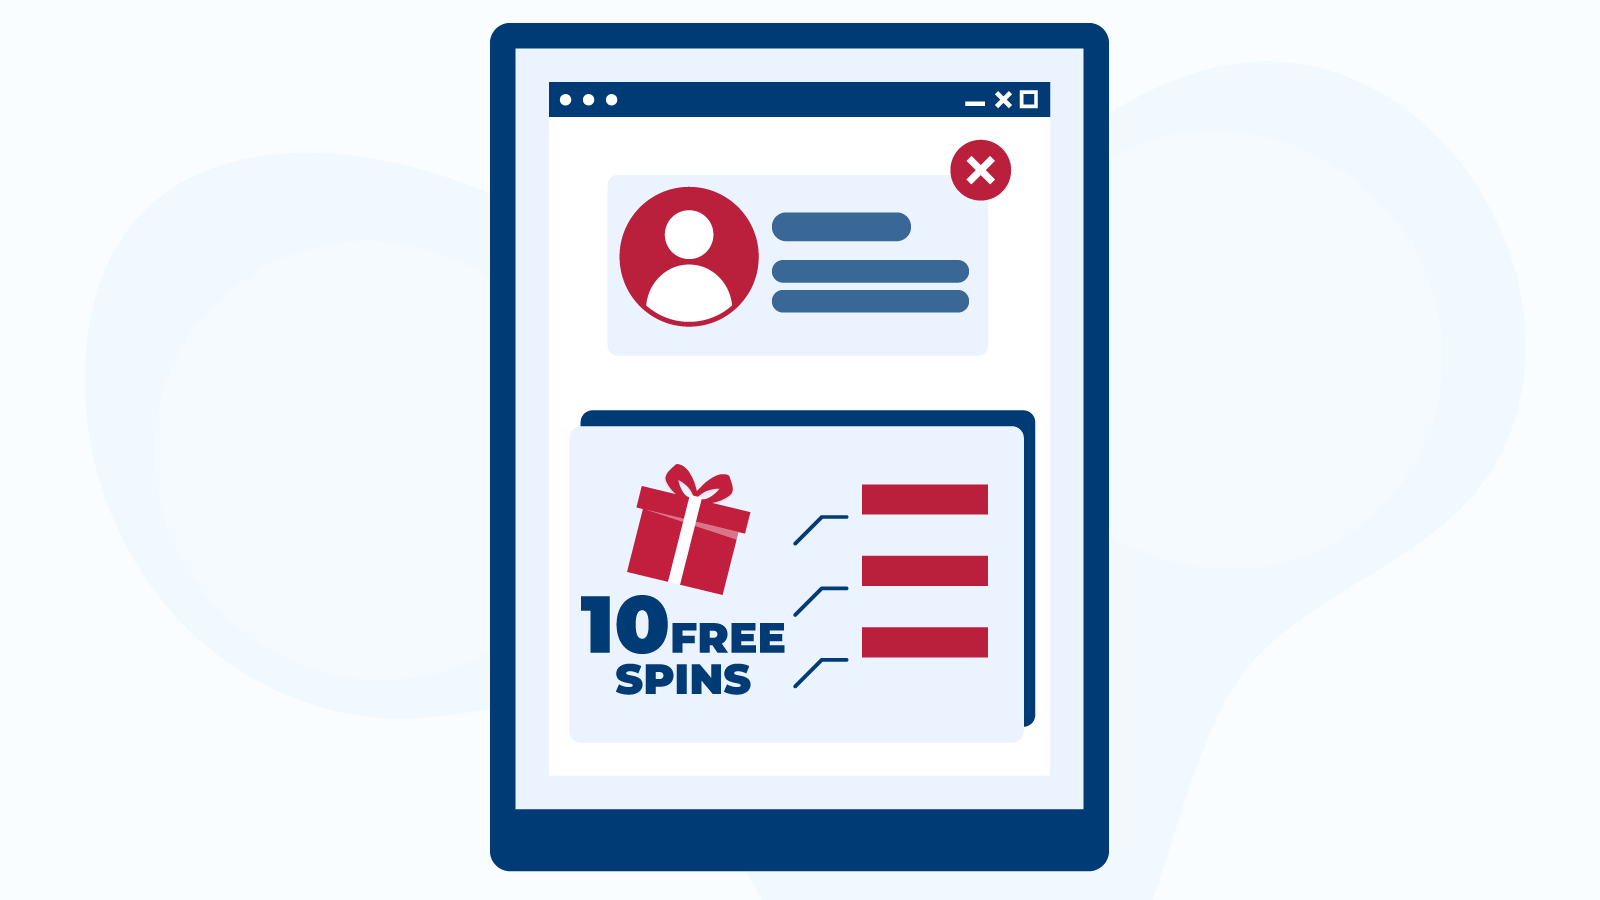 10 Free Spins for Existing Customers Bonuses